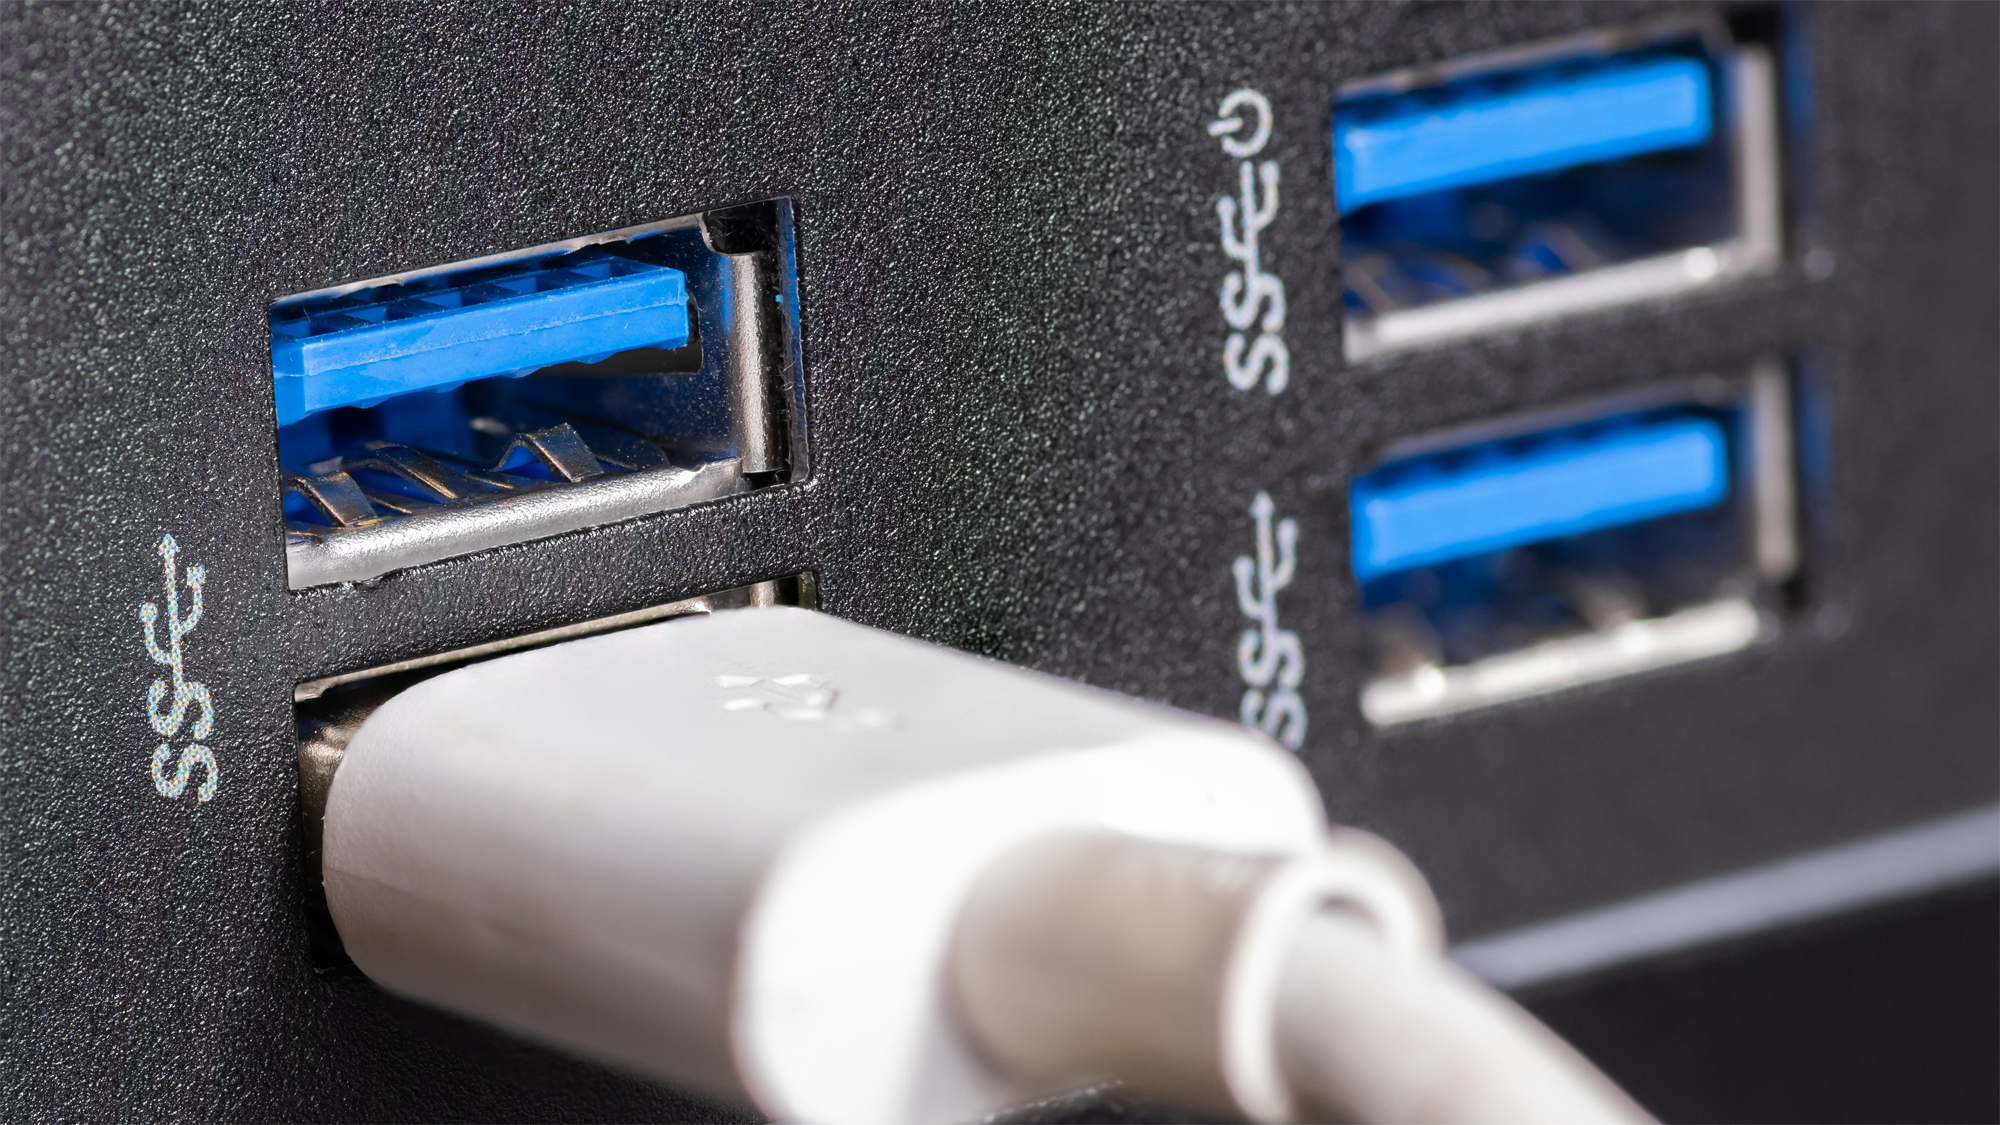 USB 3.0 / 3.1 / 3.2 5 Gbps ports are often blue